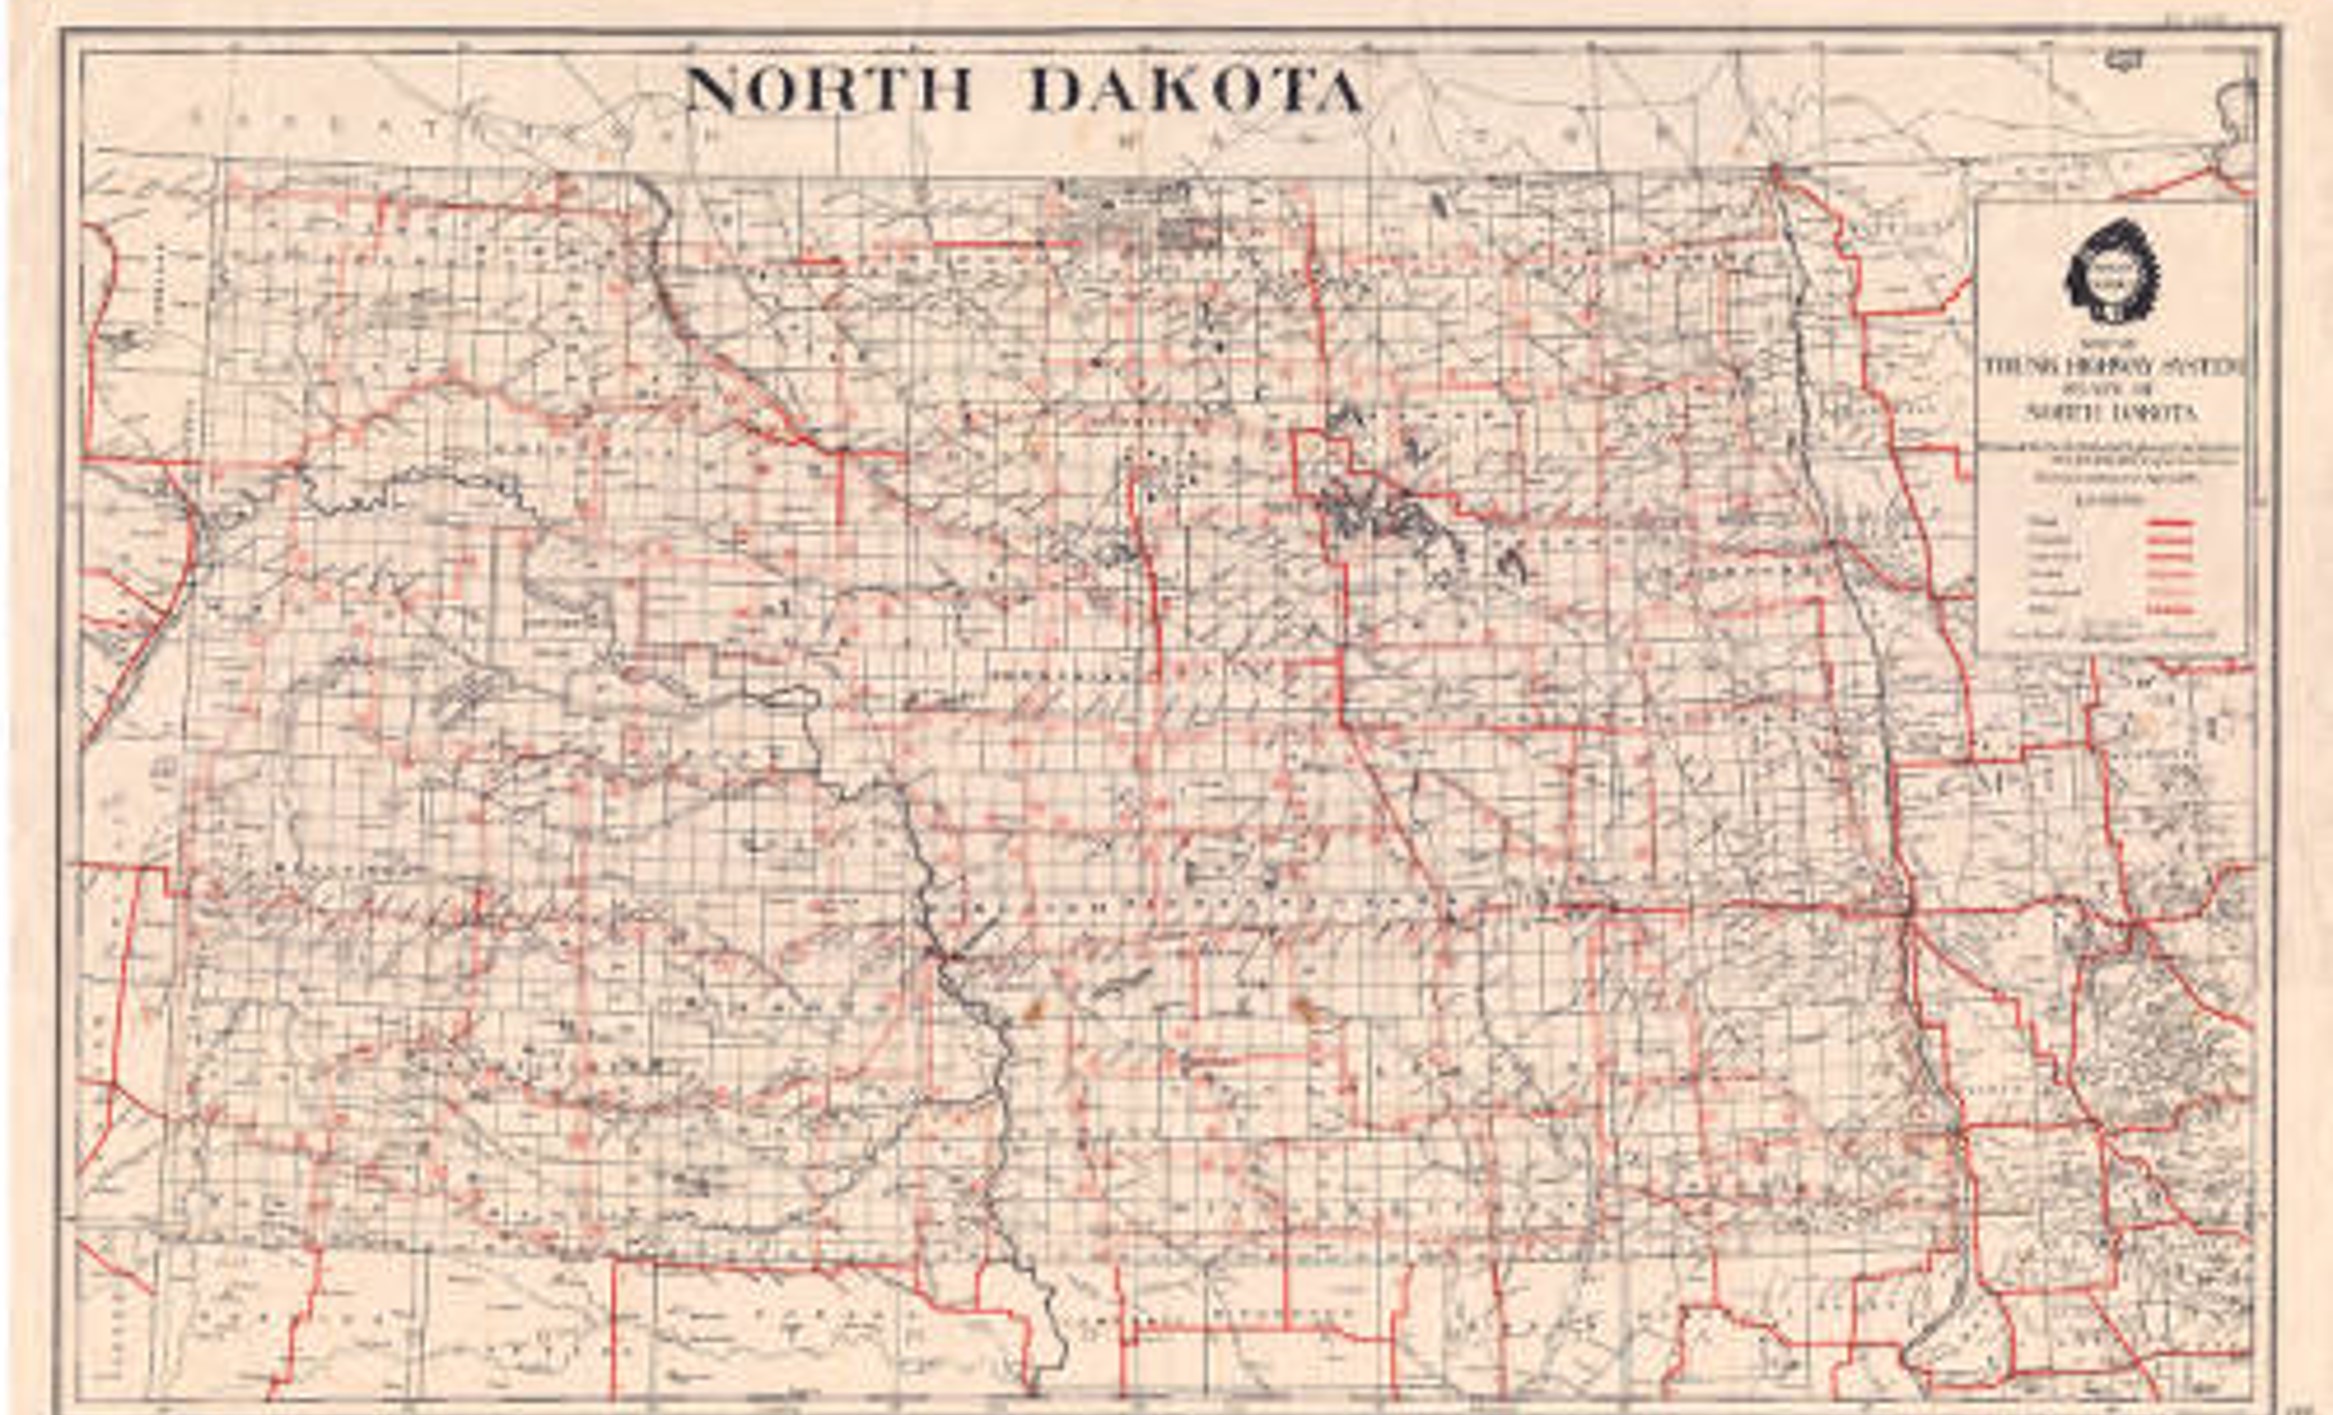 Trunk Highway System of ND Map (1924)